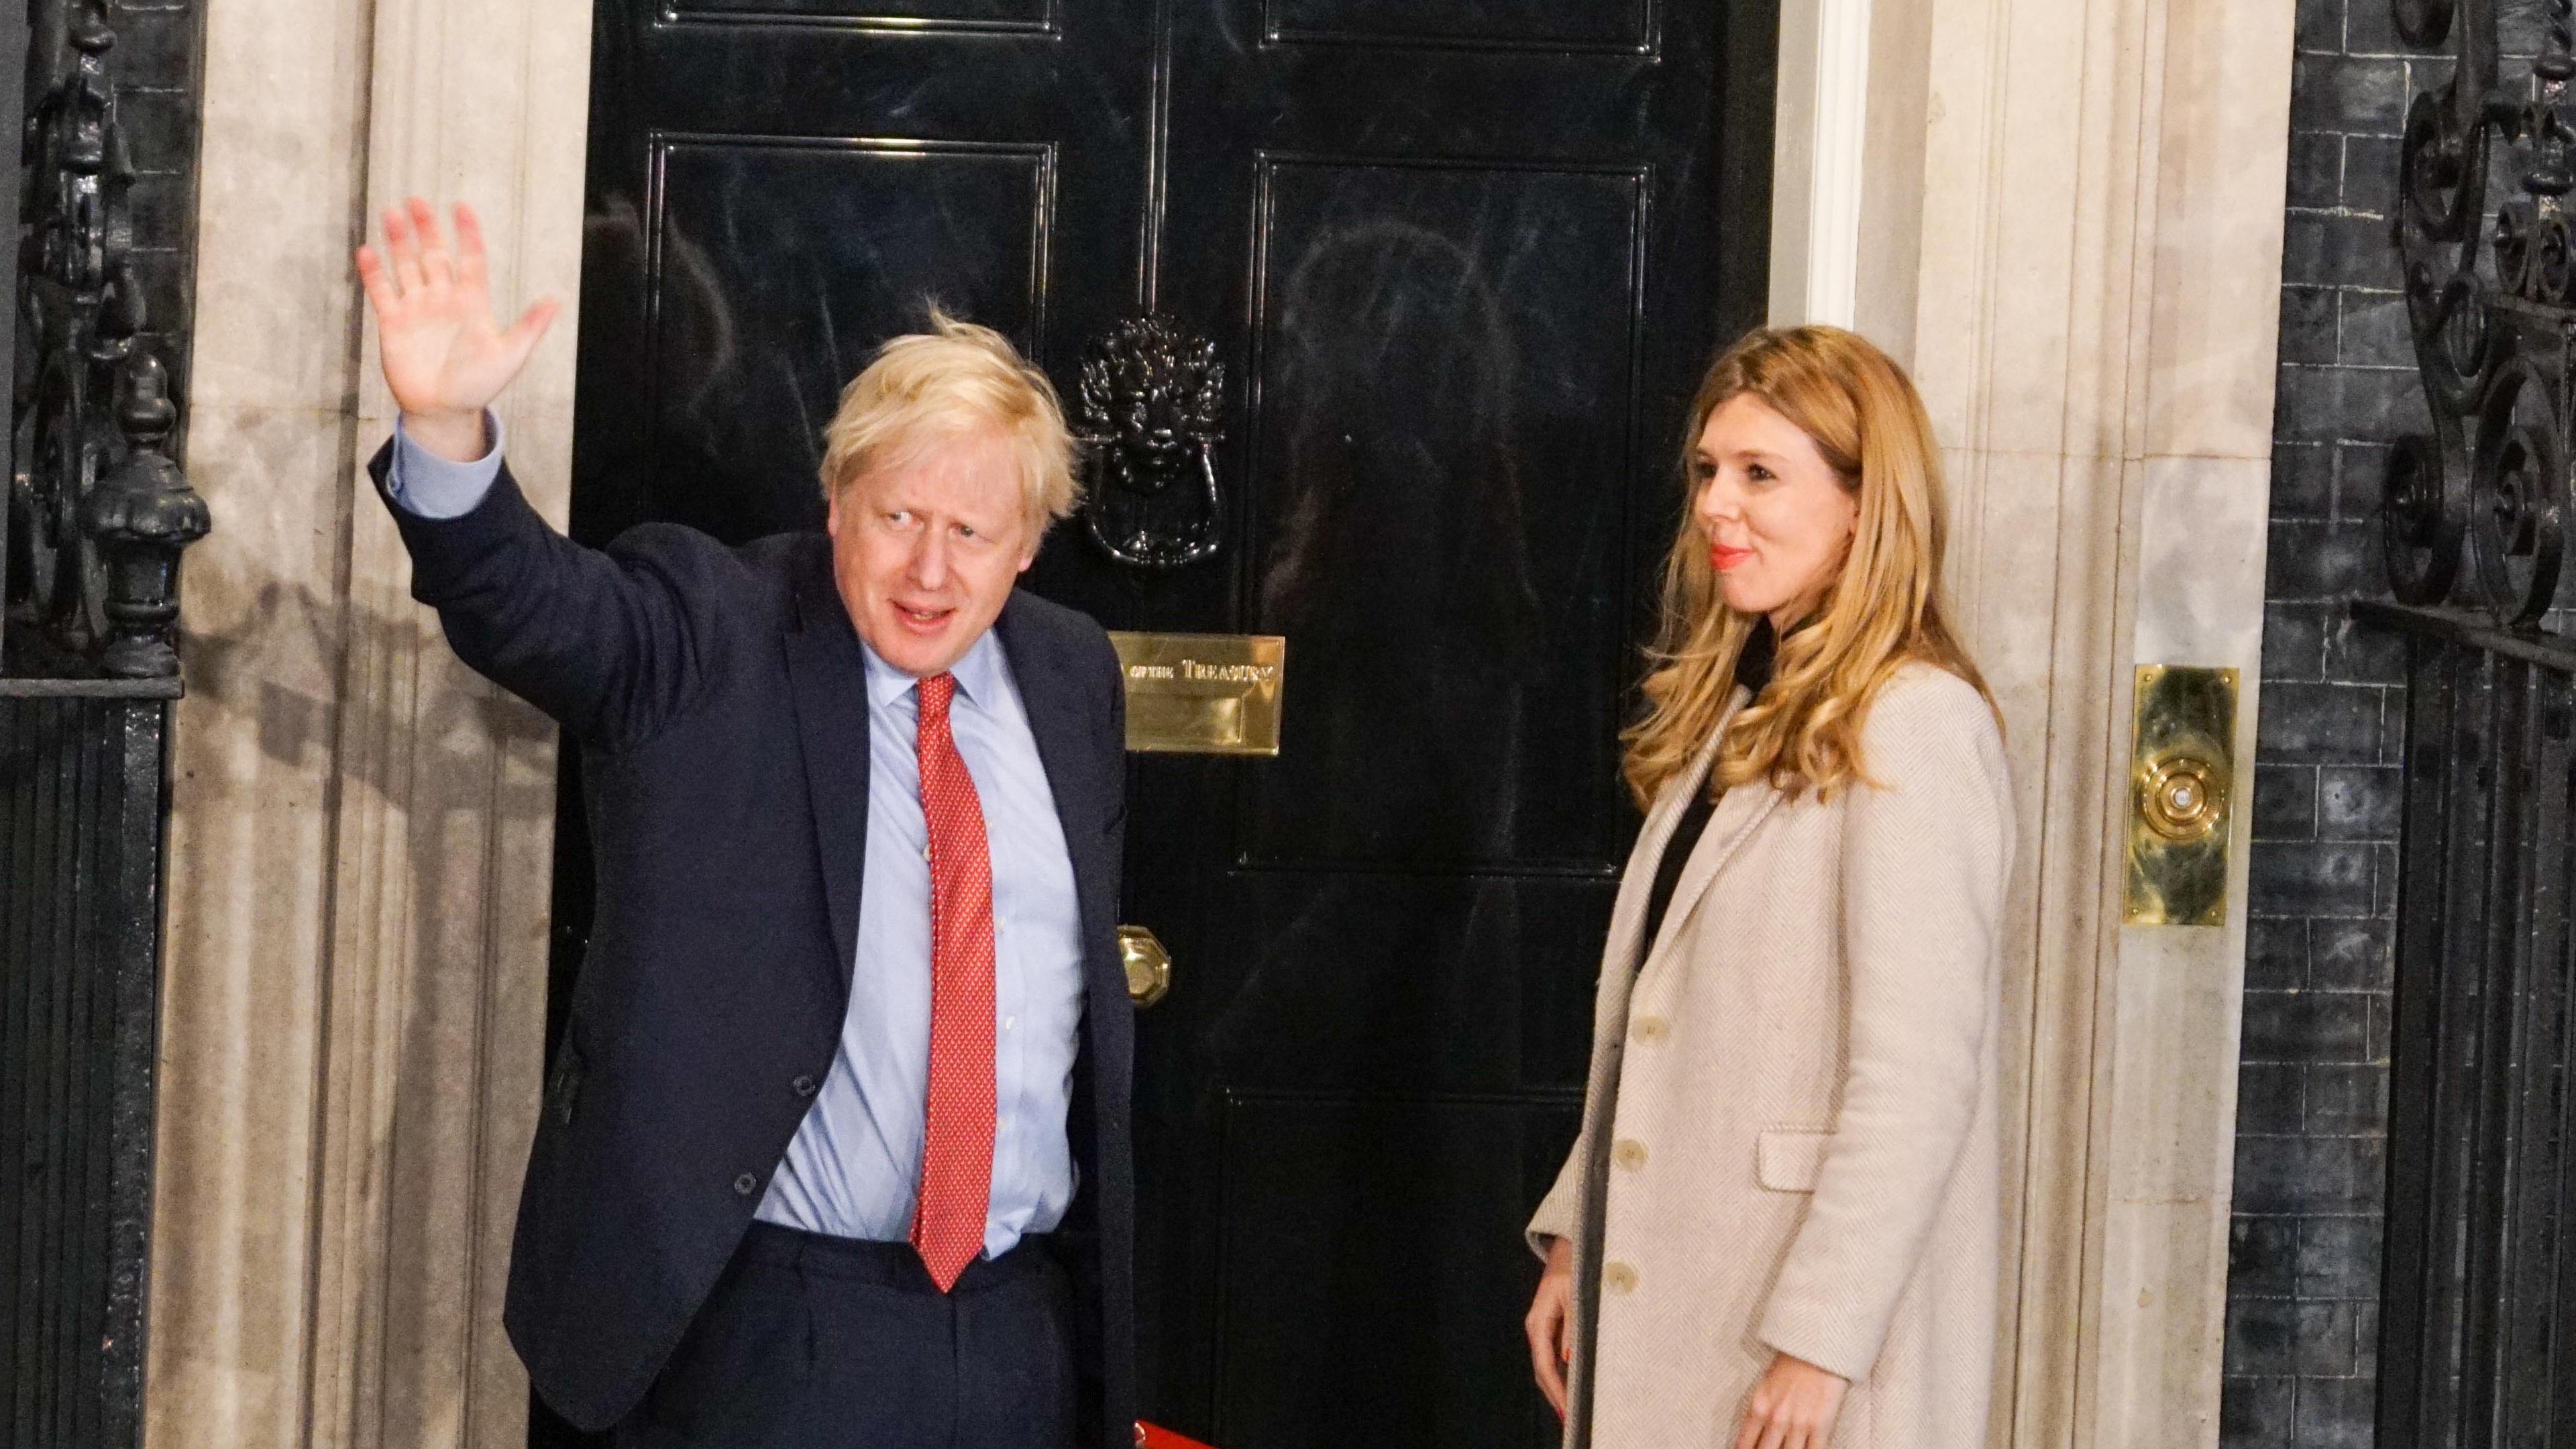 Boris Johnson and Carrie Symonds in Downing Street after the election victory